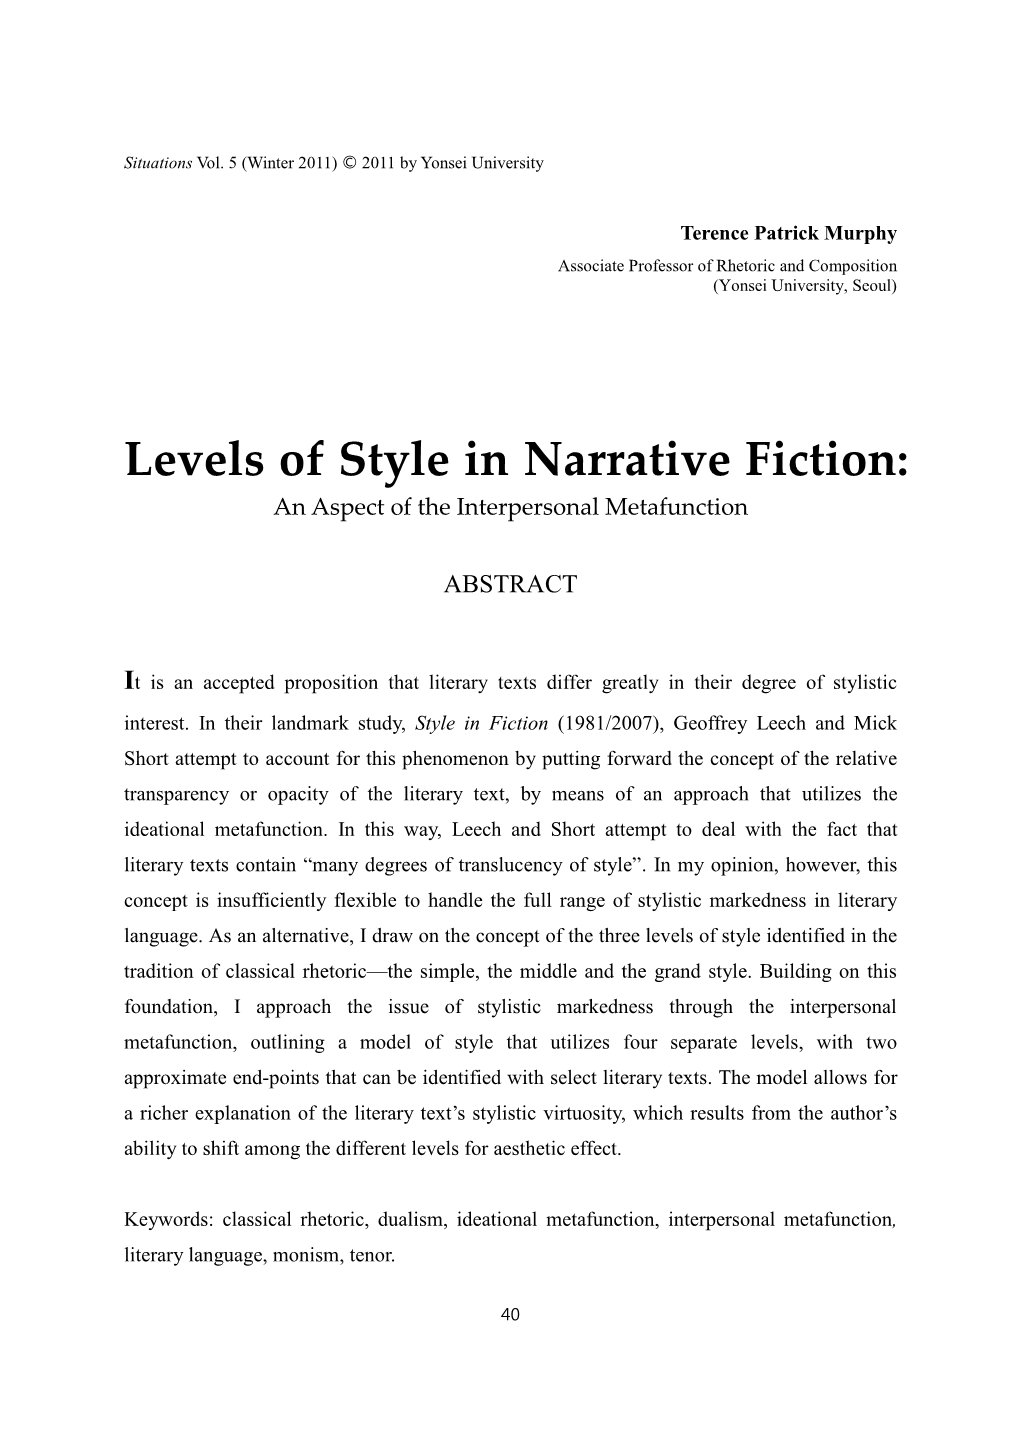 Levels of Style in Narrative Fiction: an Aspect of the Interpersonal Metafunction